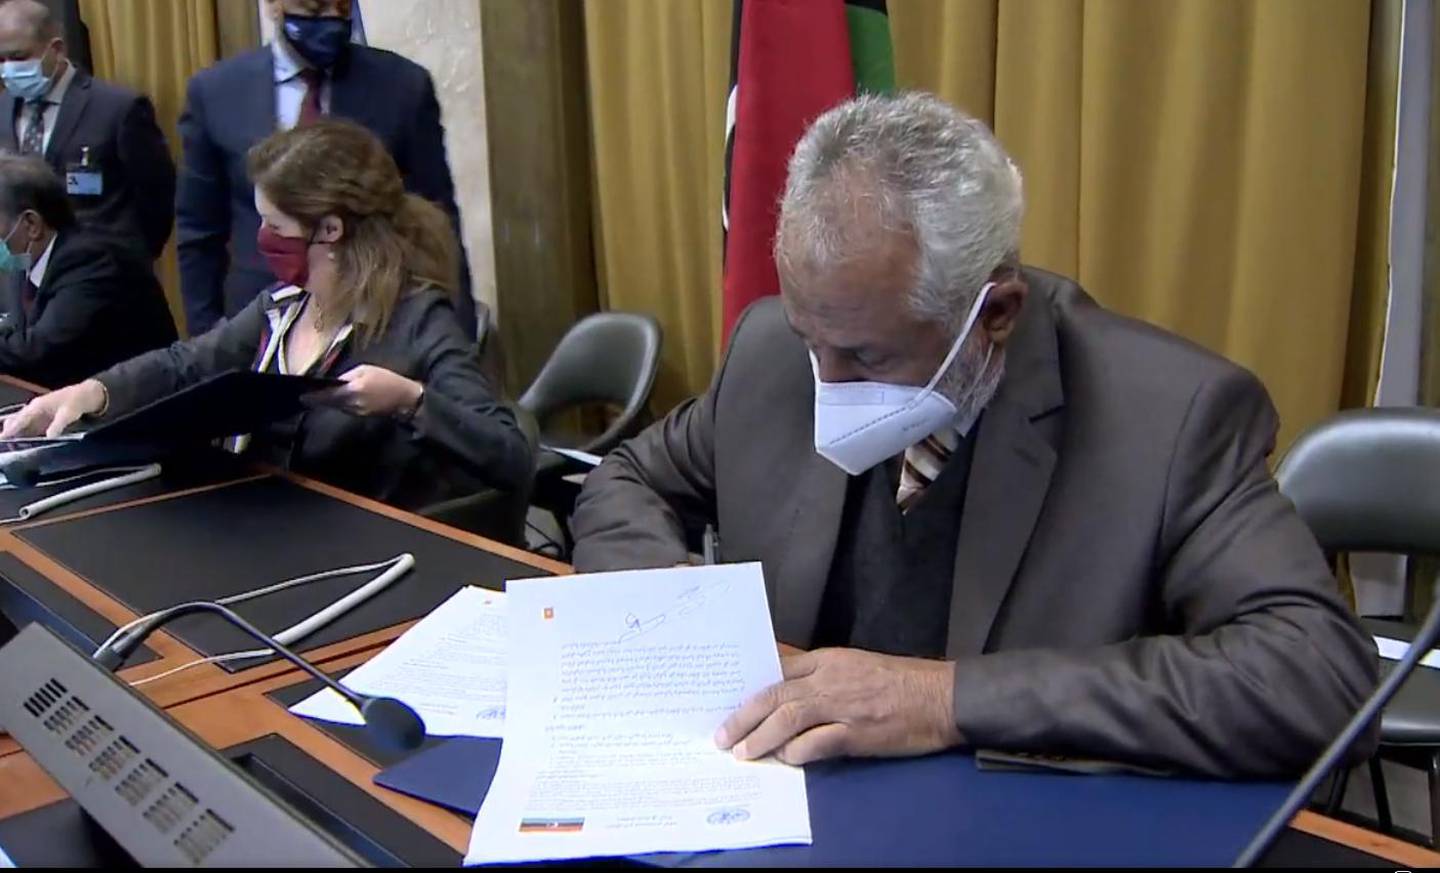 Libya's warring sides sign a 'permanent ceasefire' agreement in Geneva. Facebook screengrab via UNSMIL